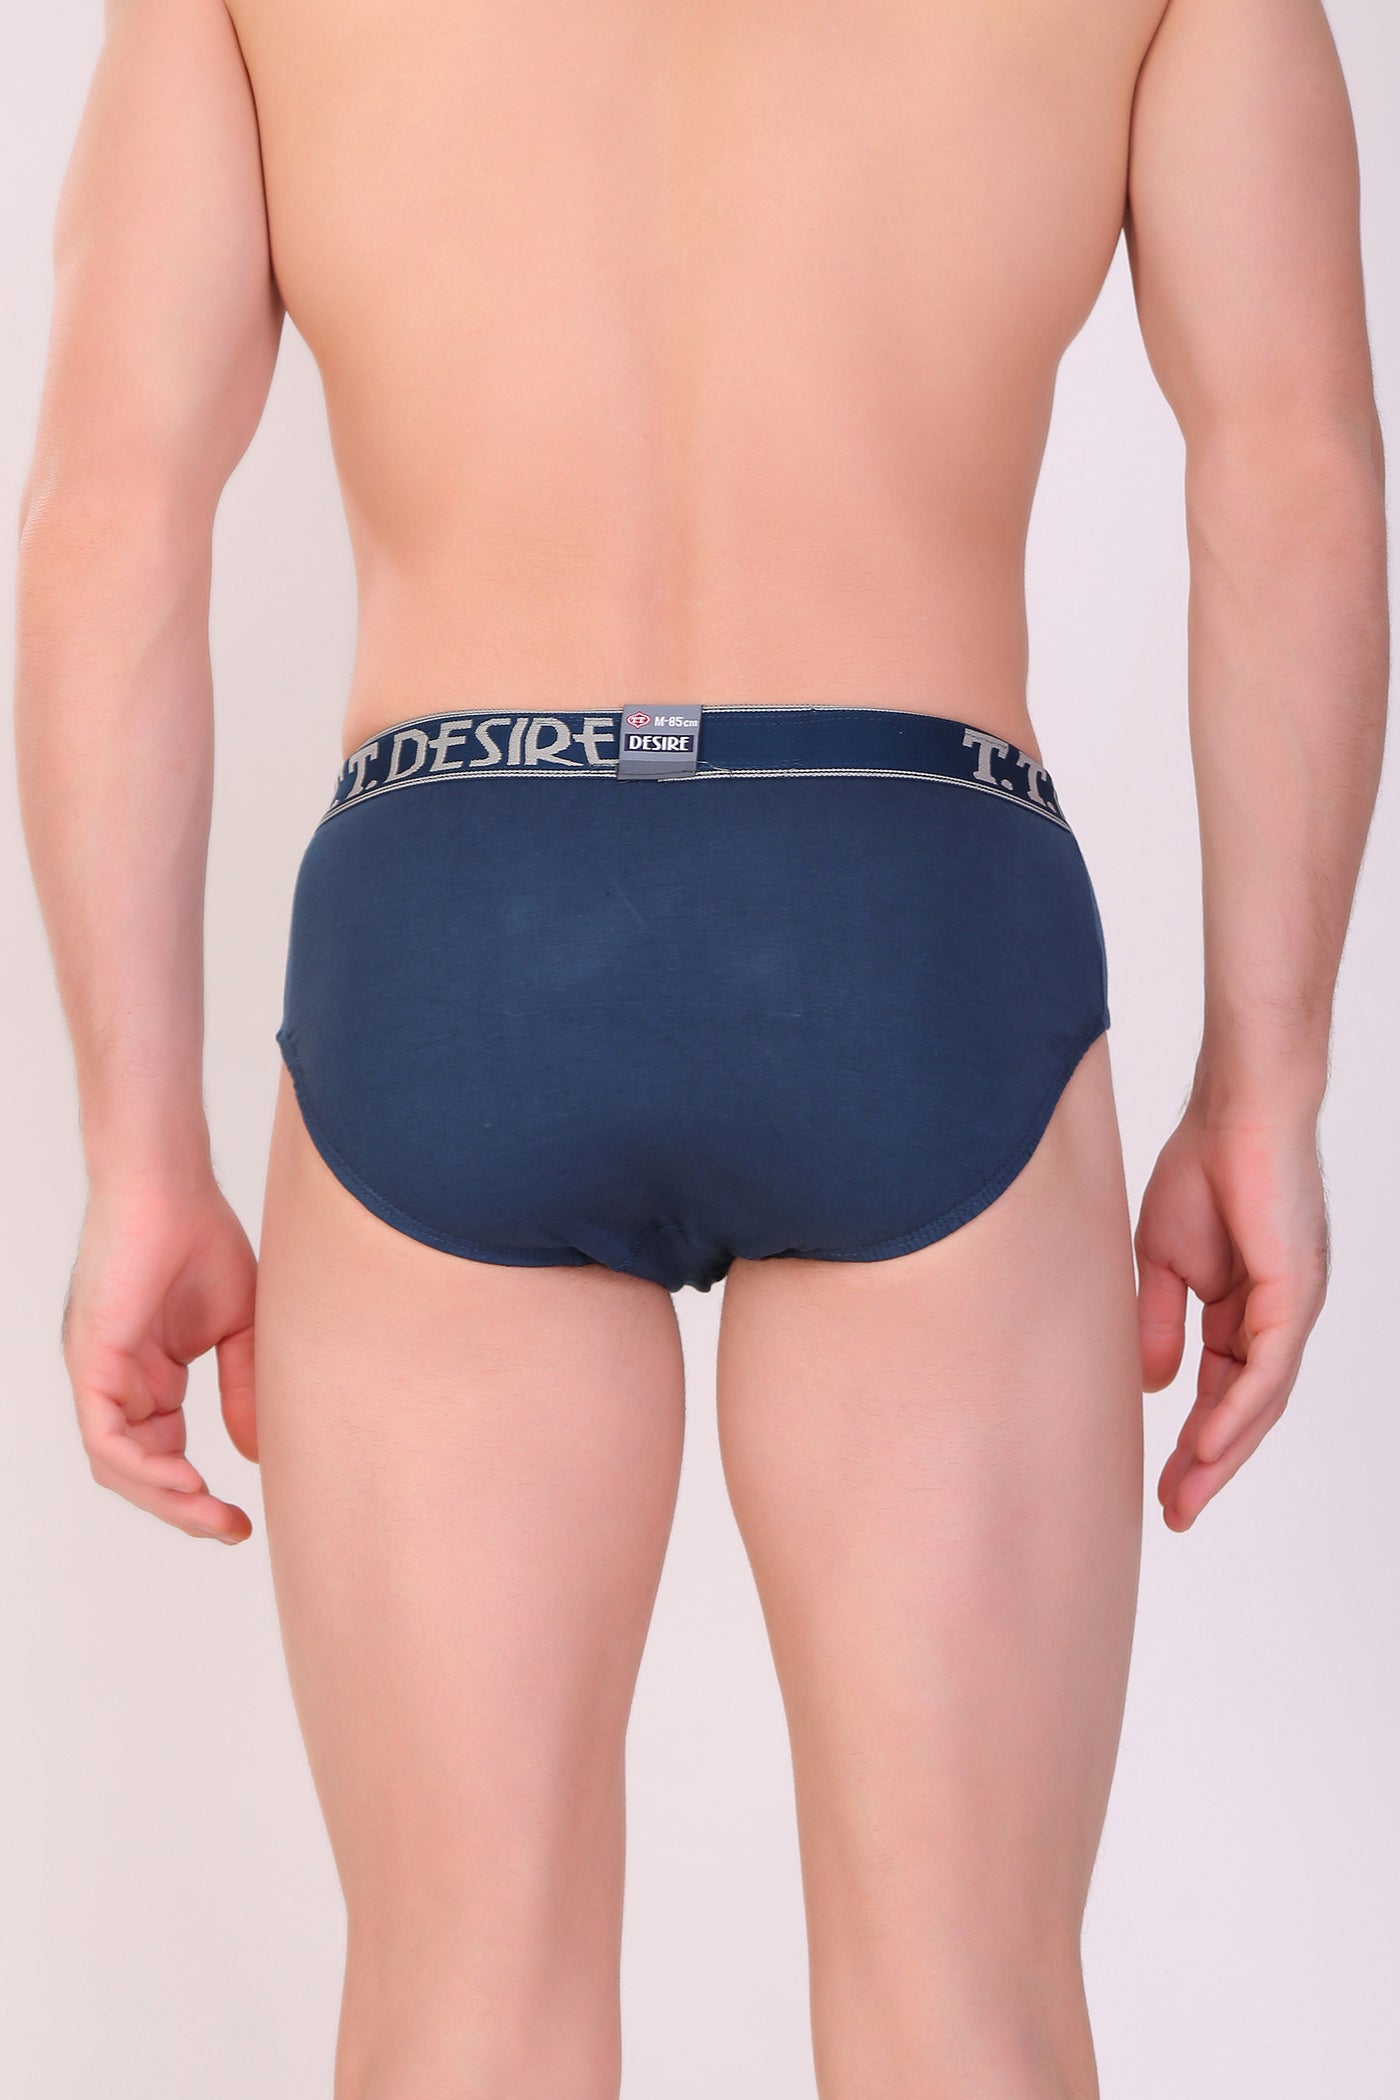 T.T. Men Desire Brief Solid Pack Of 3 Assorted Colors